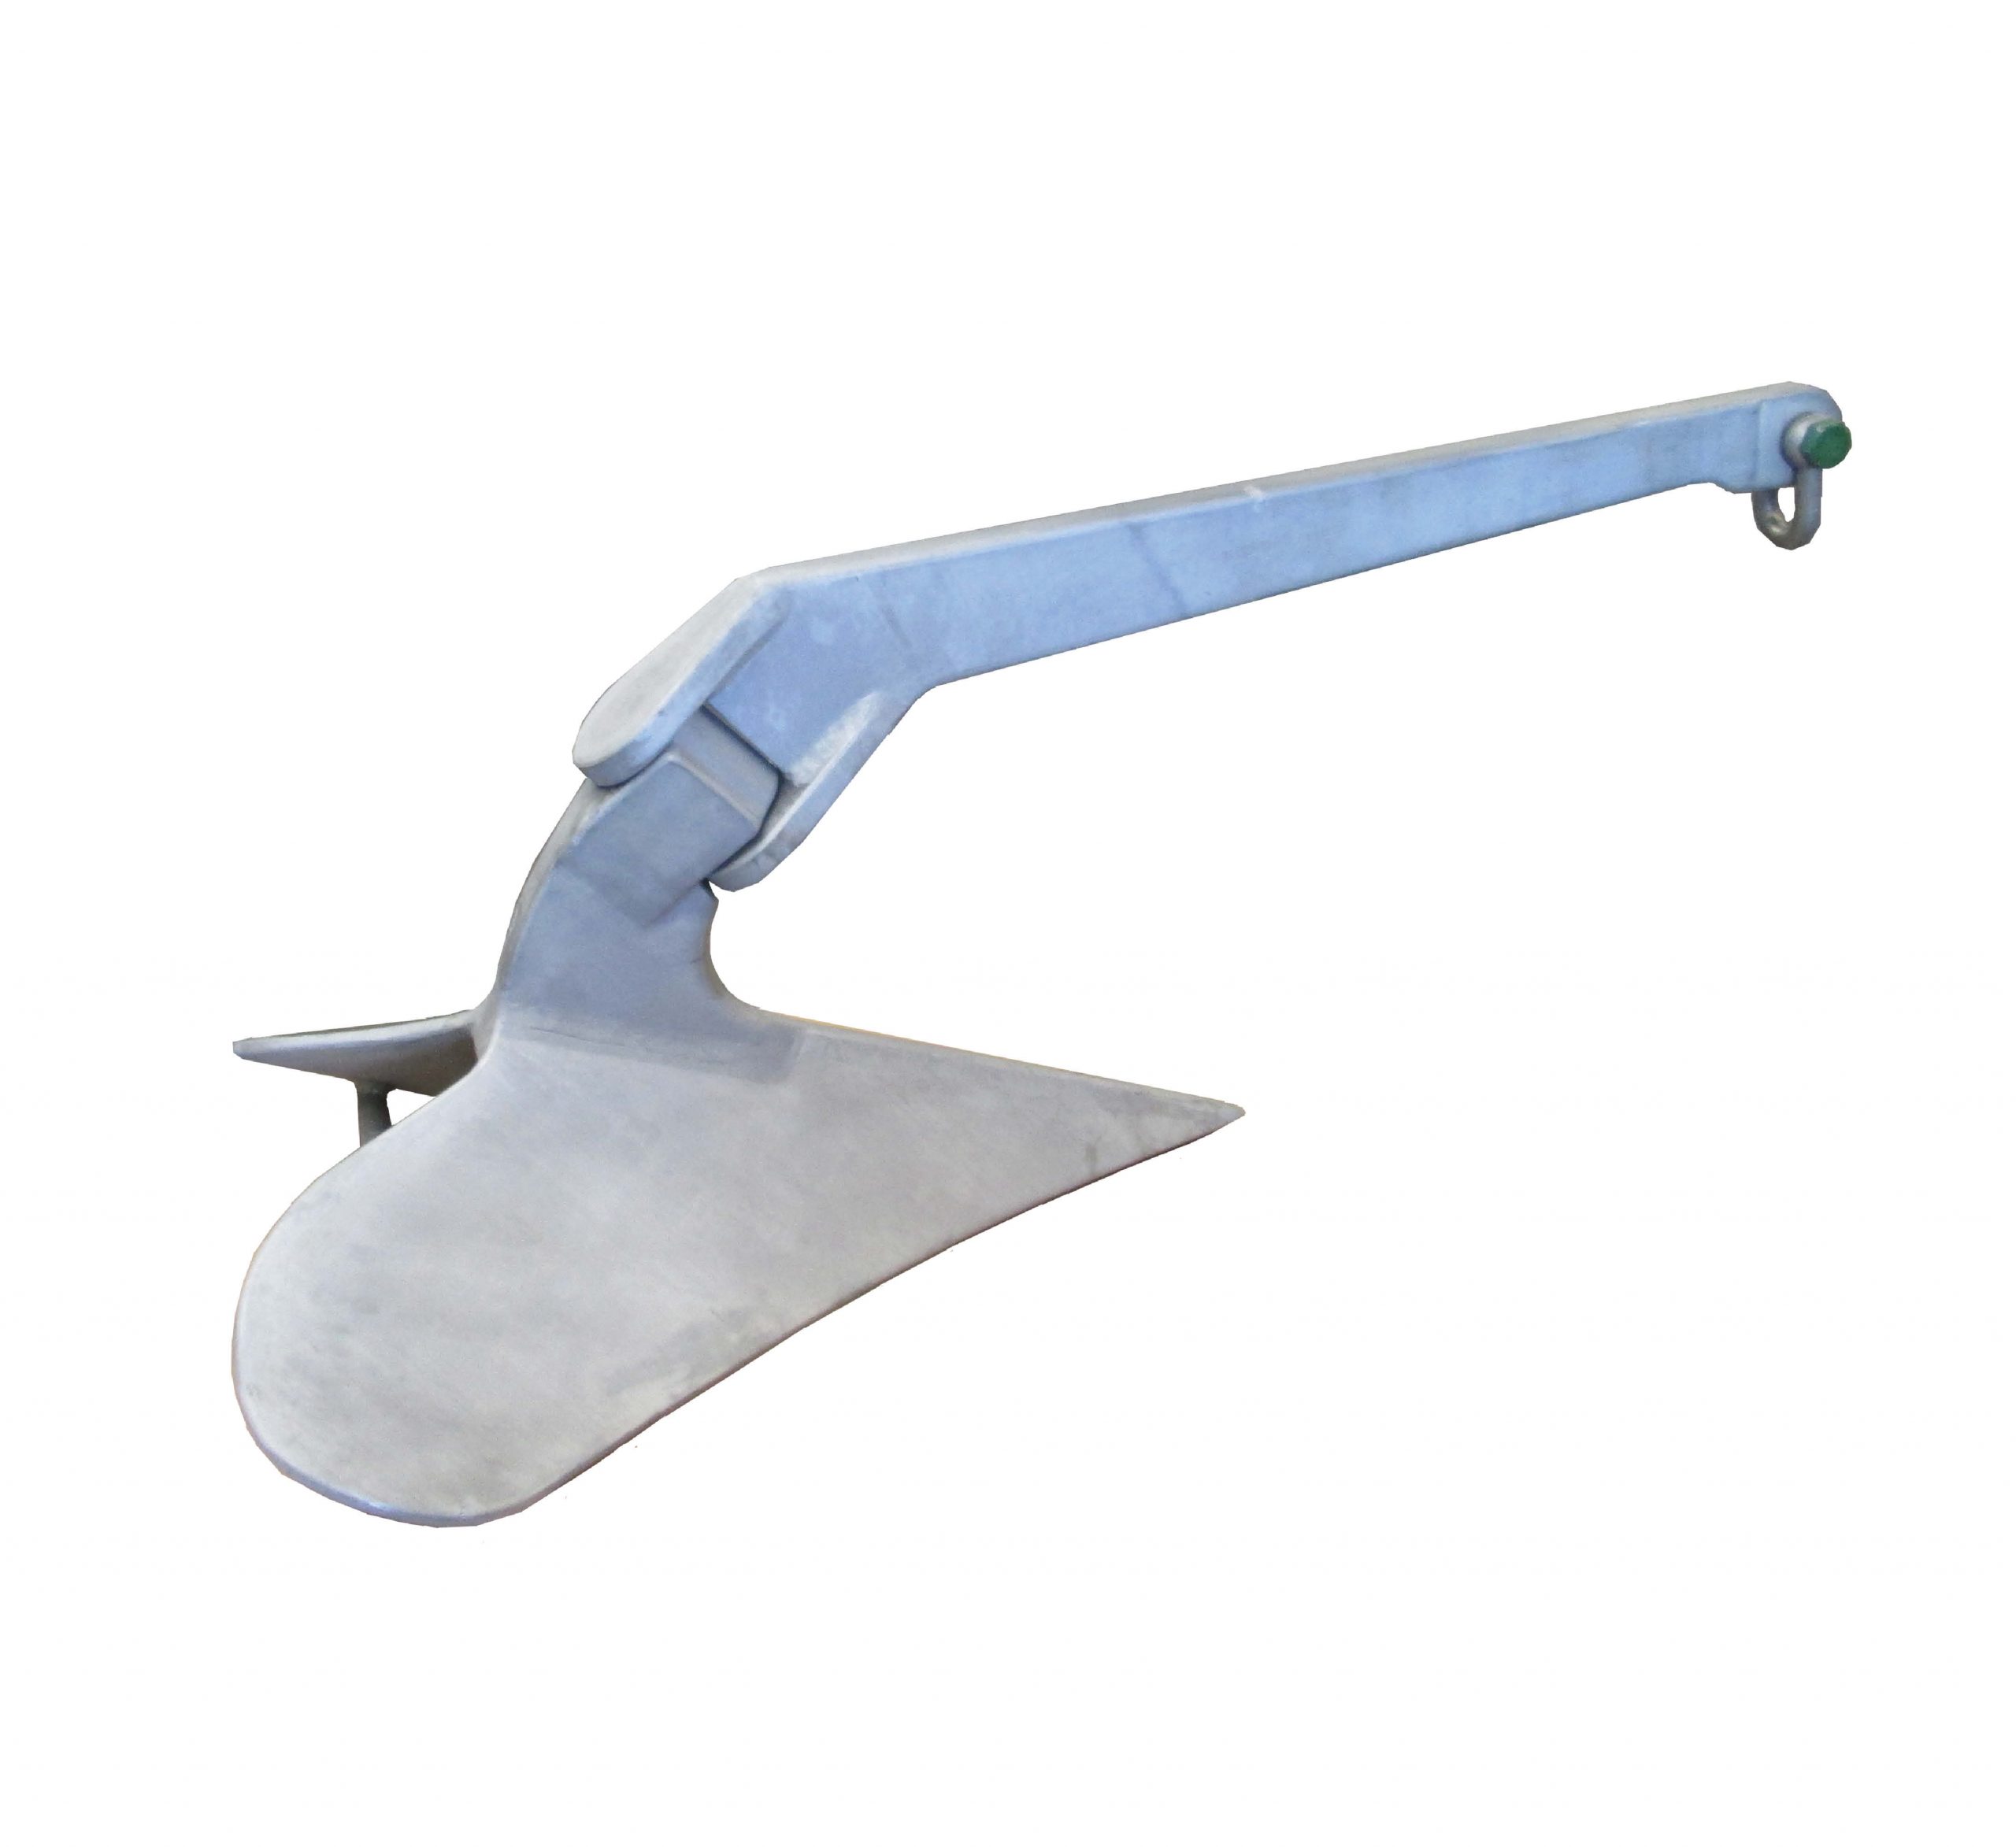 NEW 5 KG GALVANISED PLOUGH TYPE BOAT CQR ANCHOR 